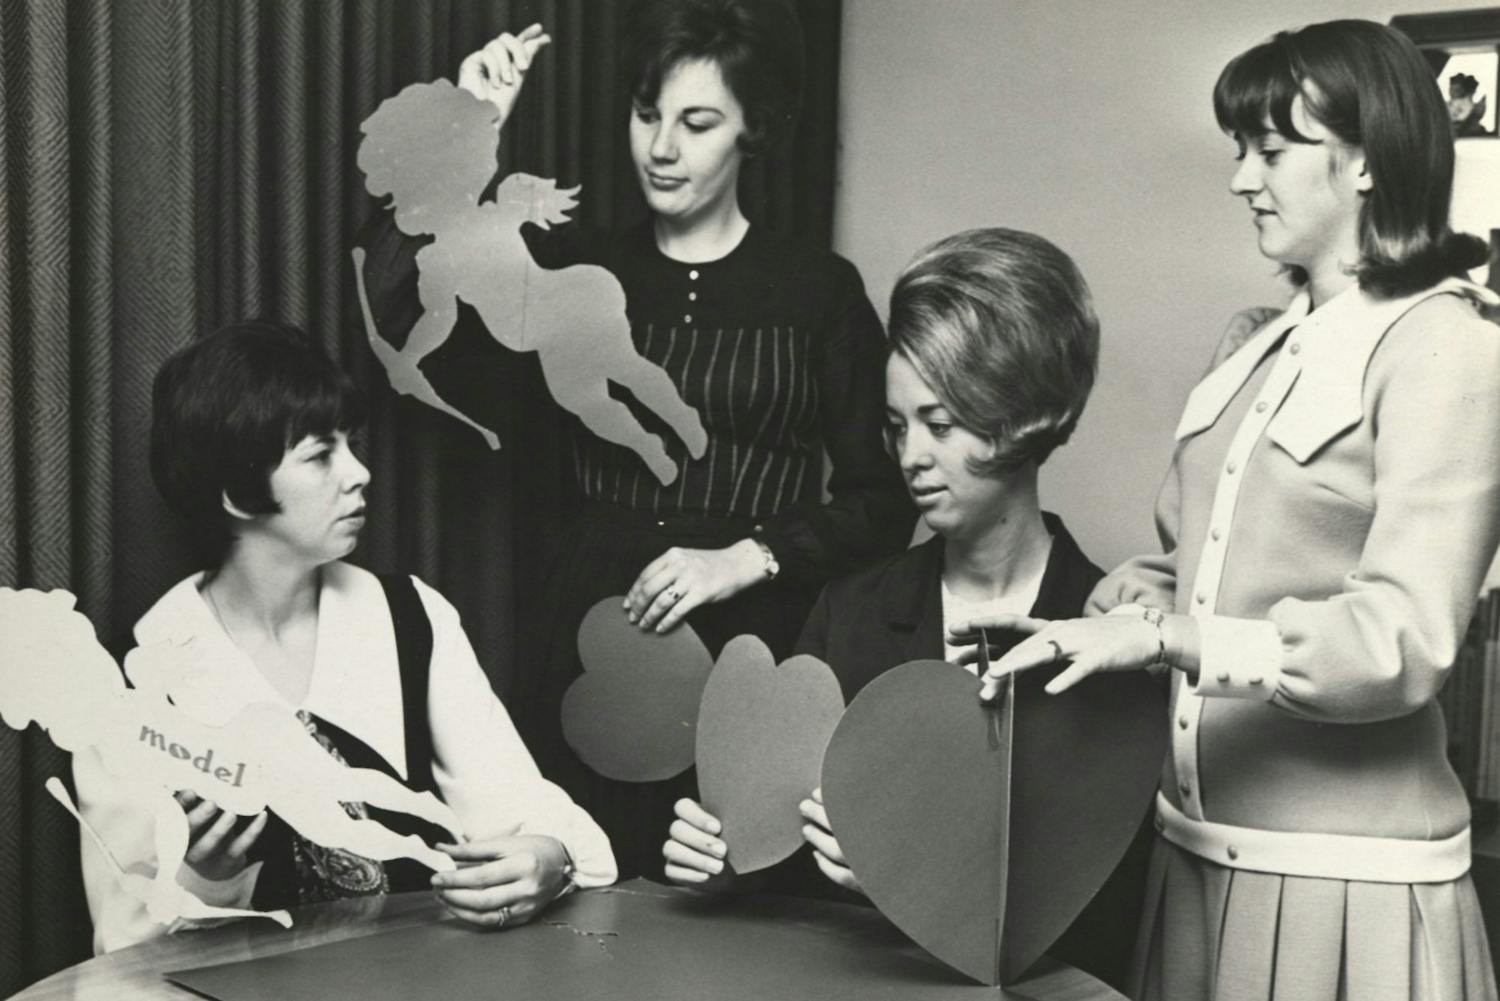 University Women’s Club members gather for a social event held between the years 1969 and 1970. 